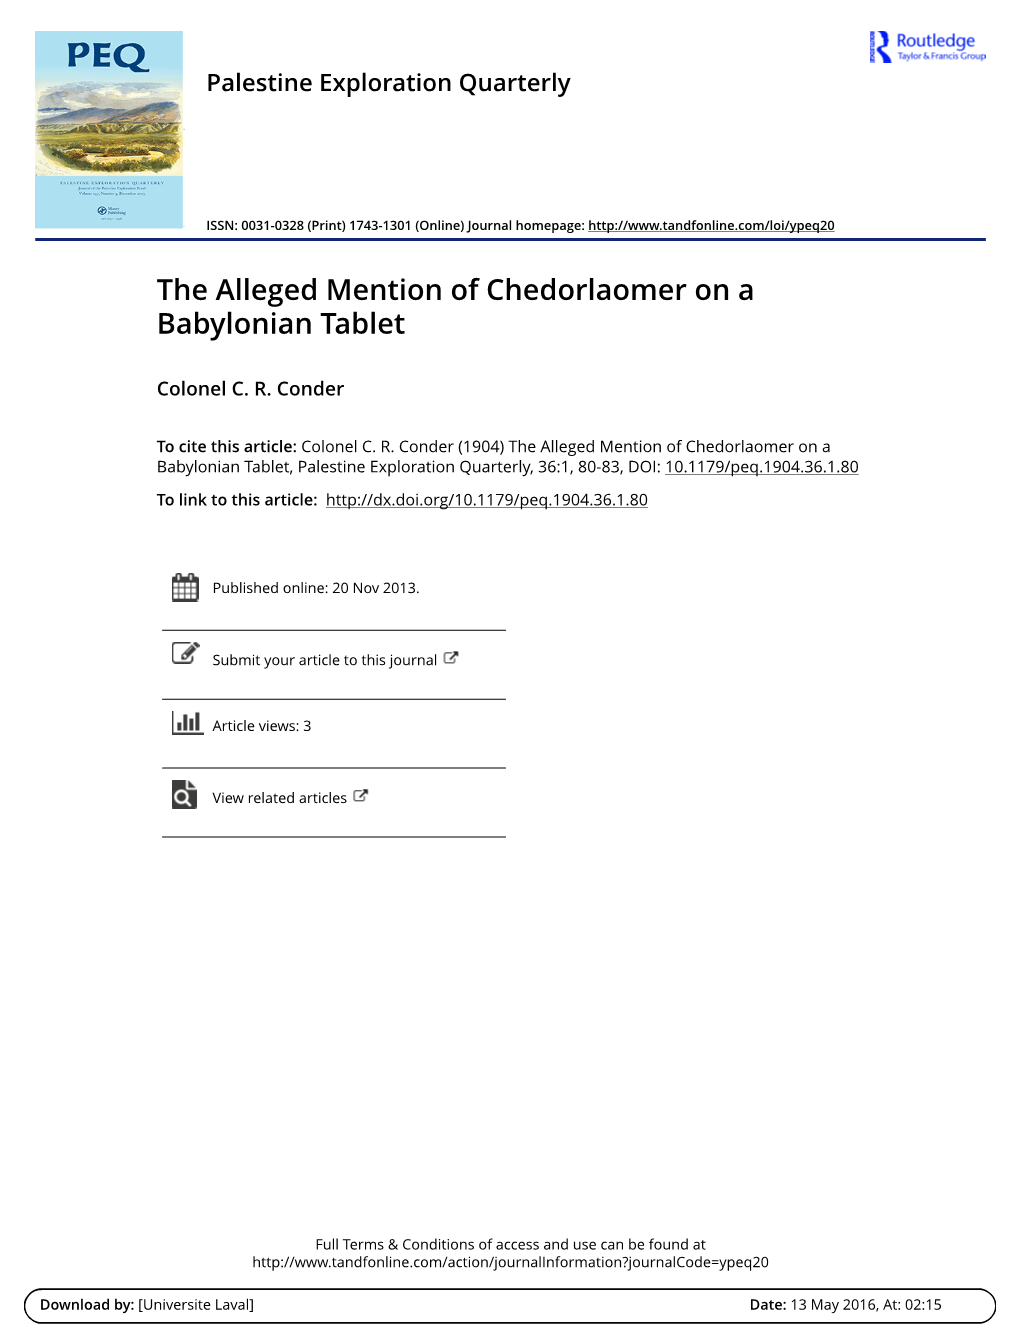 The Alleged Mention of Chedorlaomer on a Babylonian Tablet